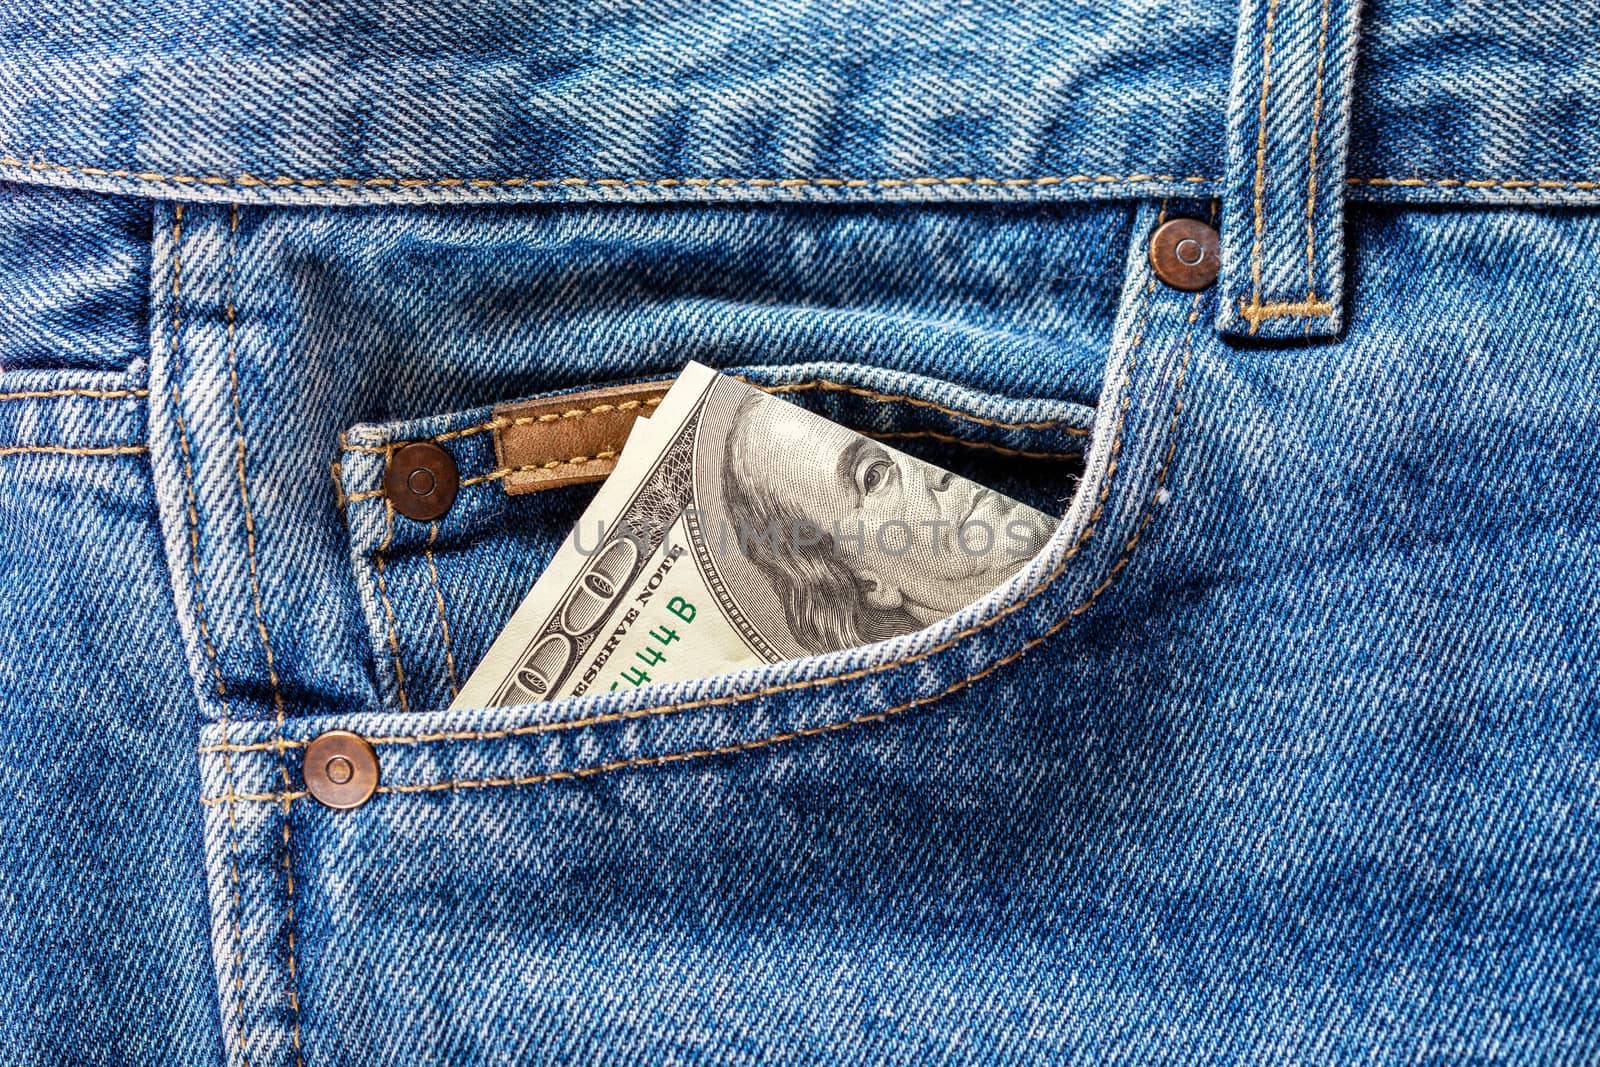 a hundred dollar banknote sticking out from front pocket of jeans - close-up